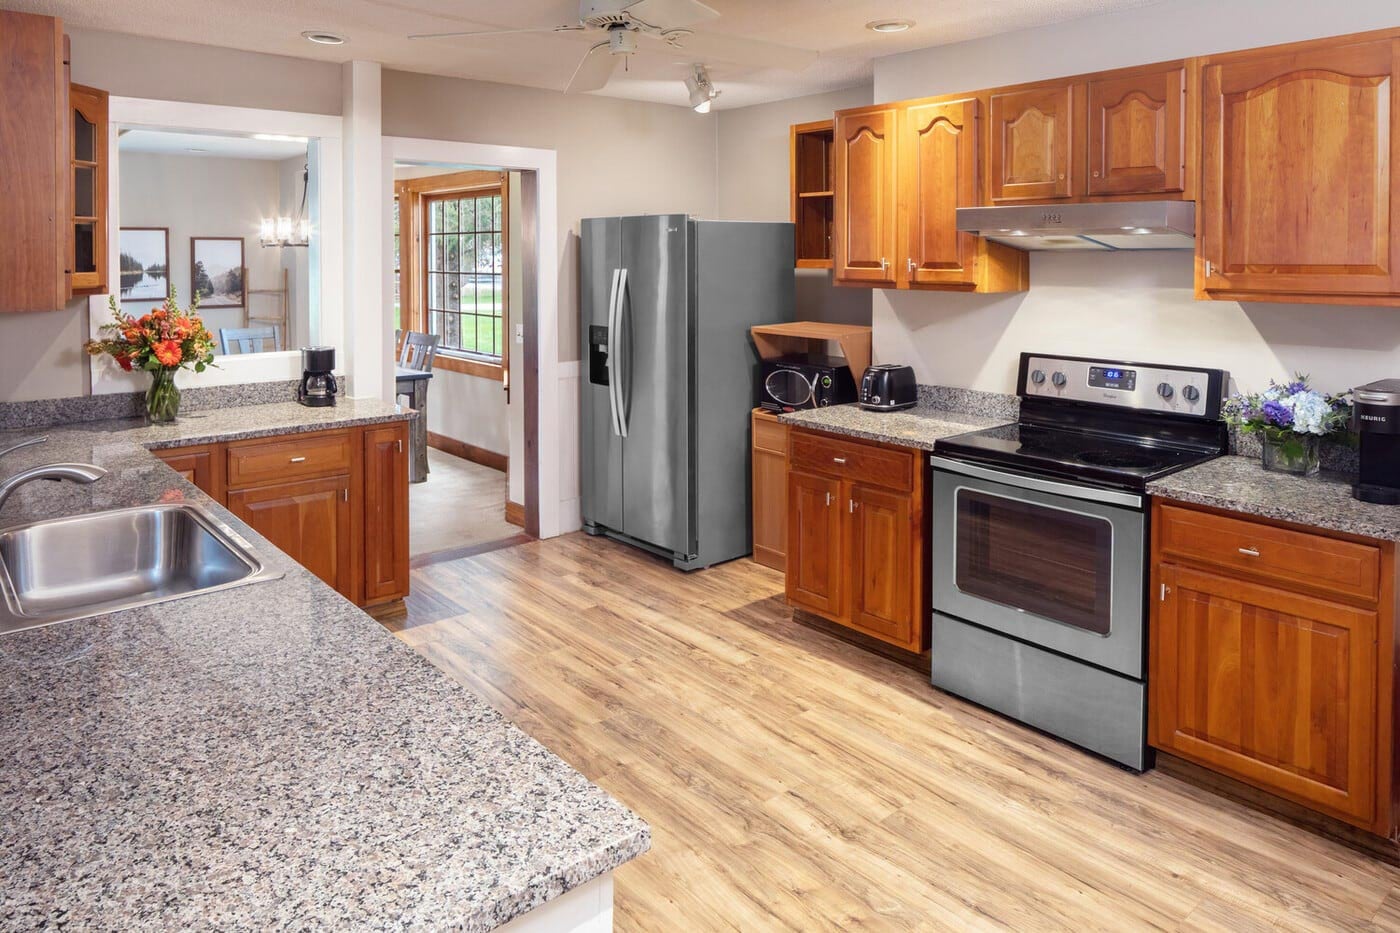 A kitchen with granite counter tops and stainless steel appliances.